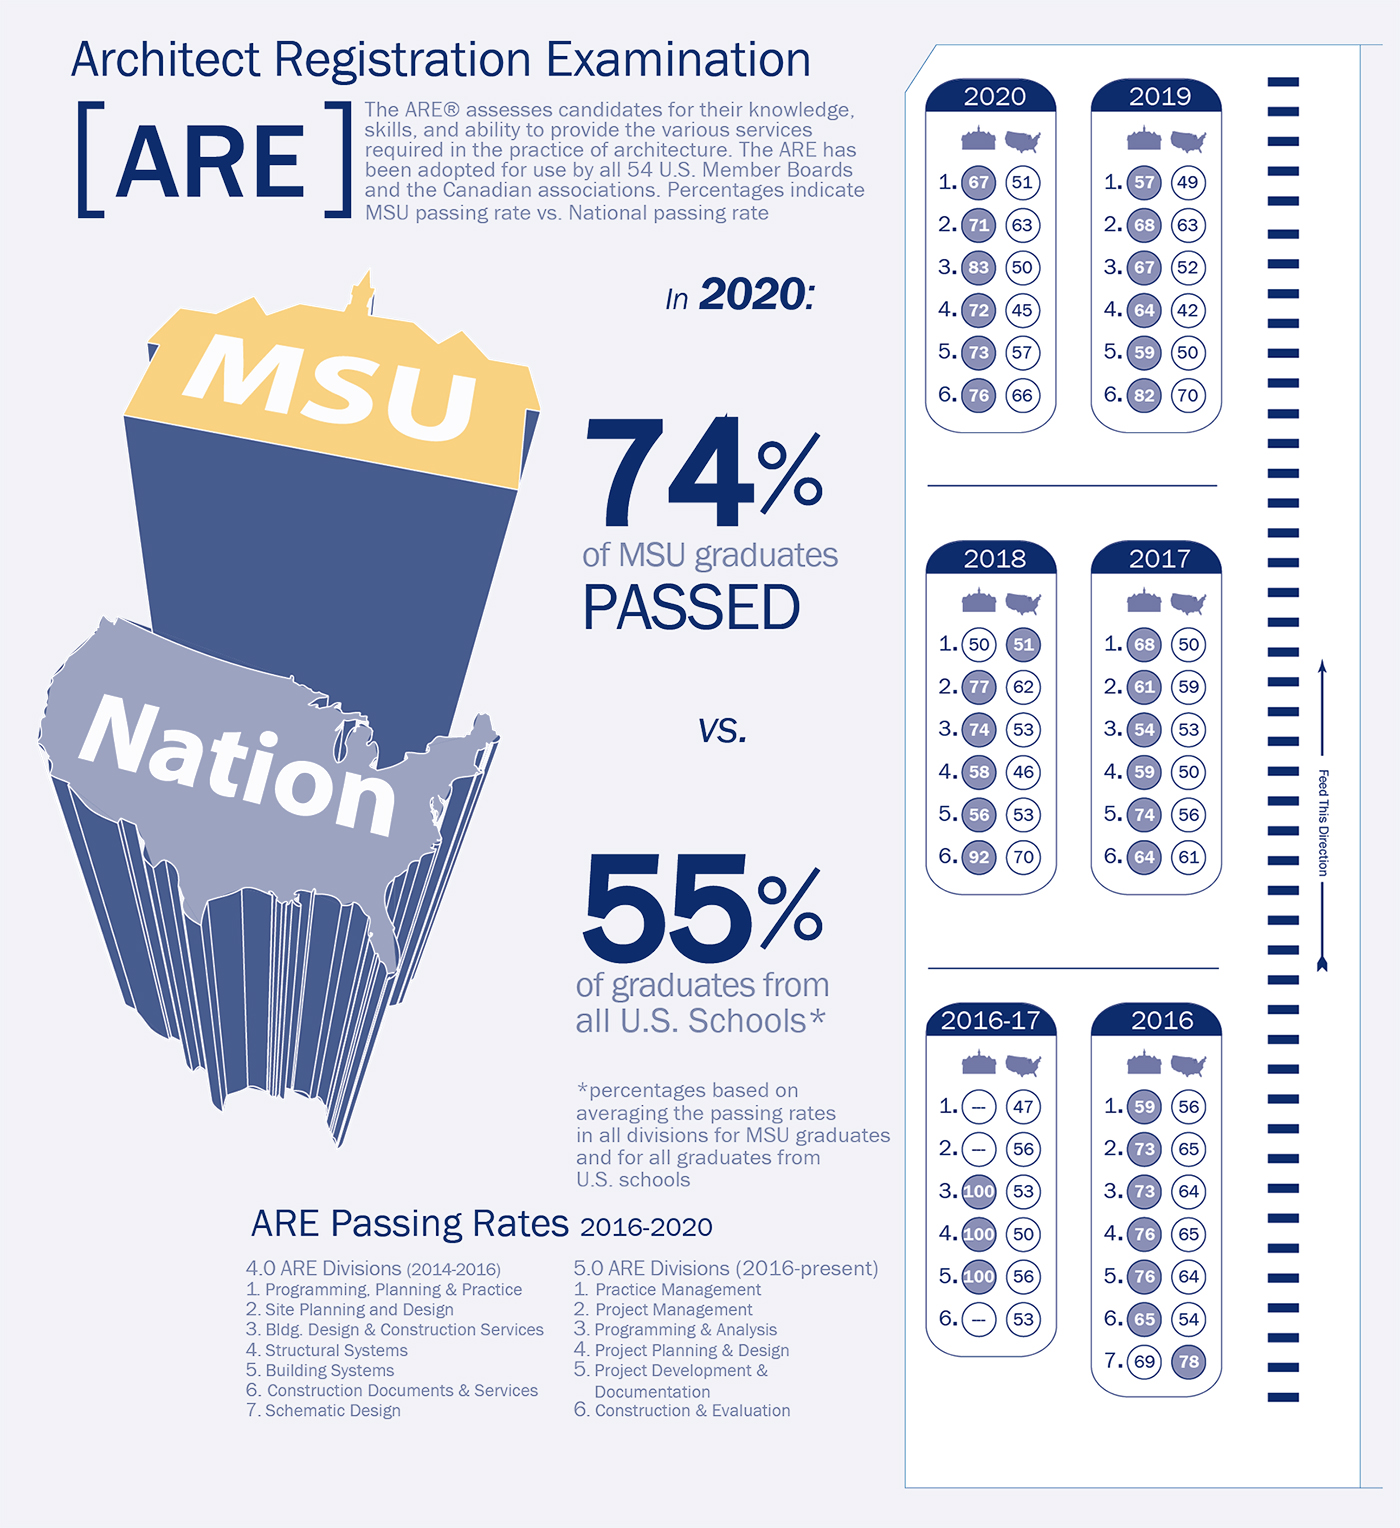 ARE Passing Rates School of Architecture Montana State University